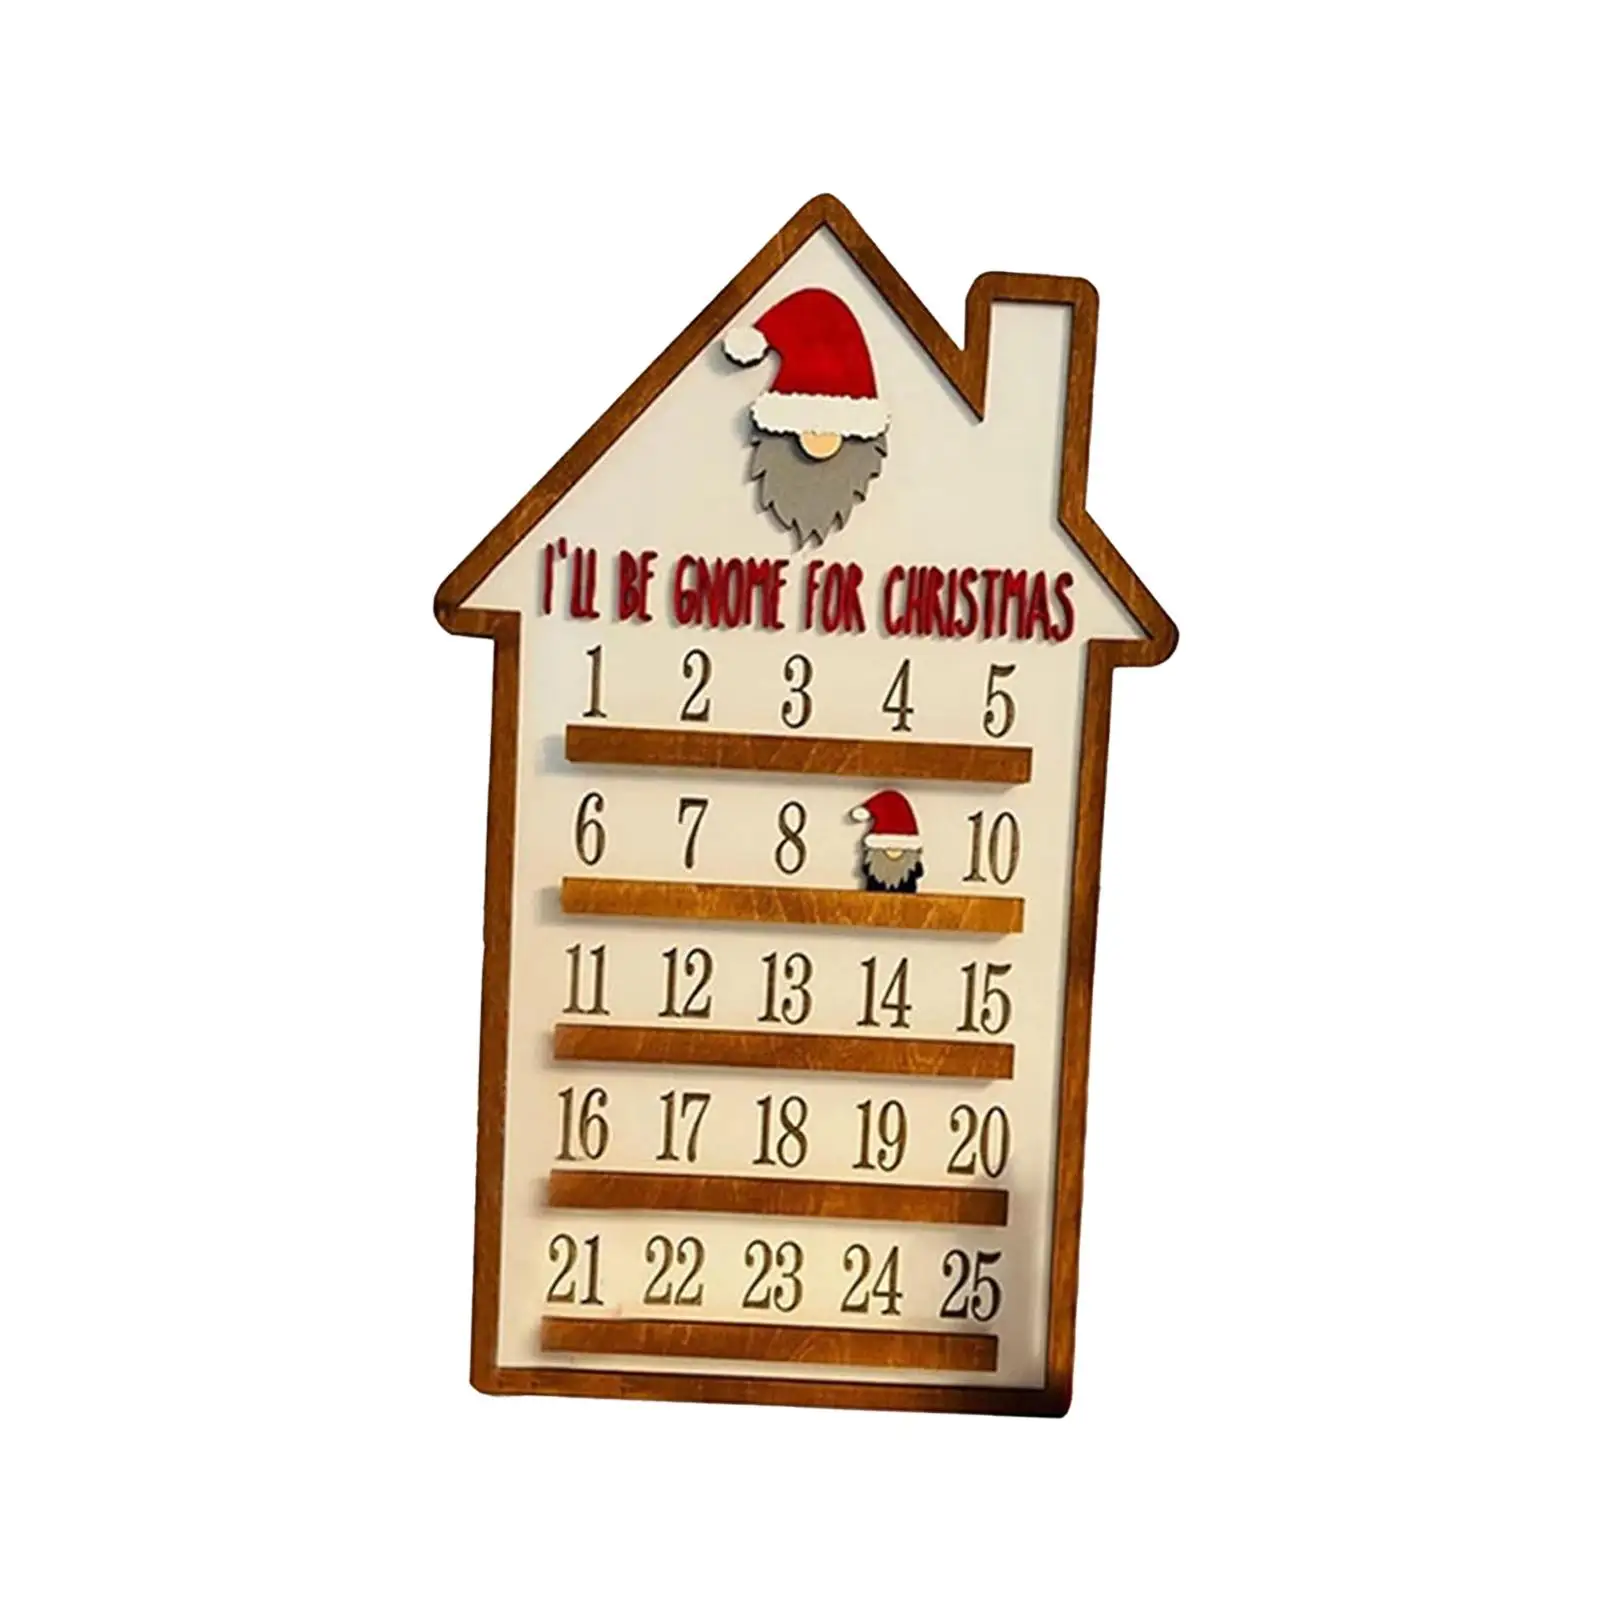 Christmas Advent Calendars Desktop Table Decor Wooden Crafts Holiday Decor for Holiday Party Office Bedroom Holdiday Gifts